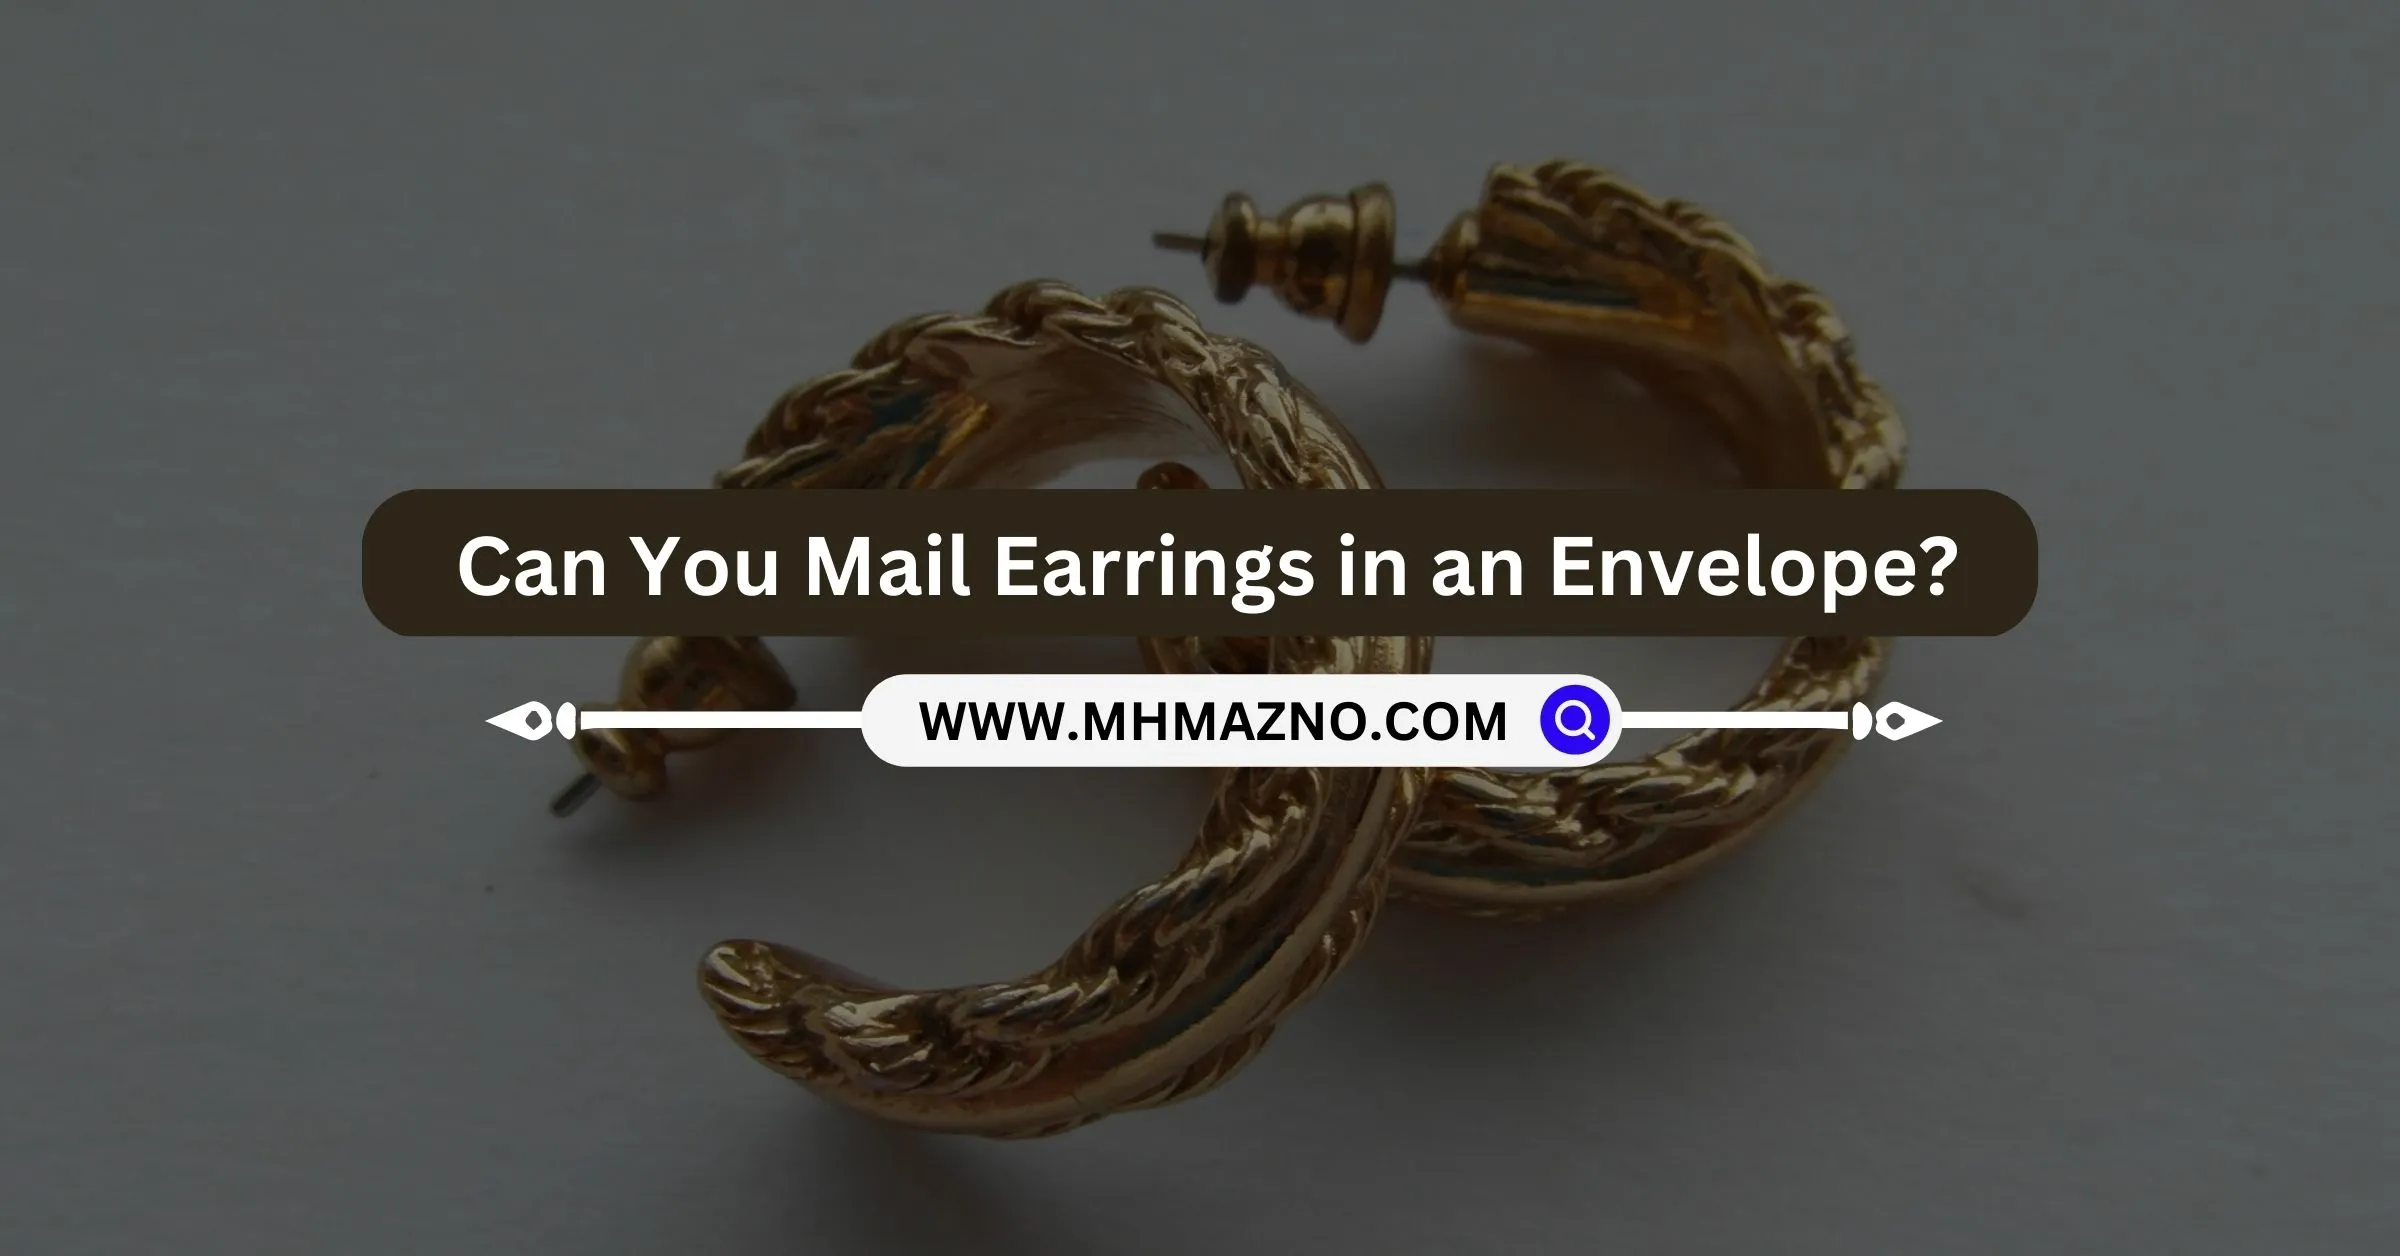 Can You Mail Earrings in an Envelope?